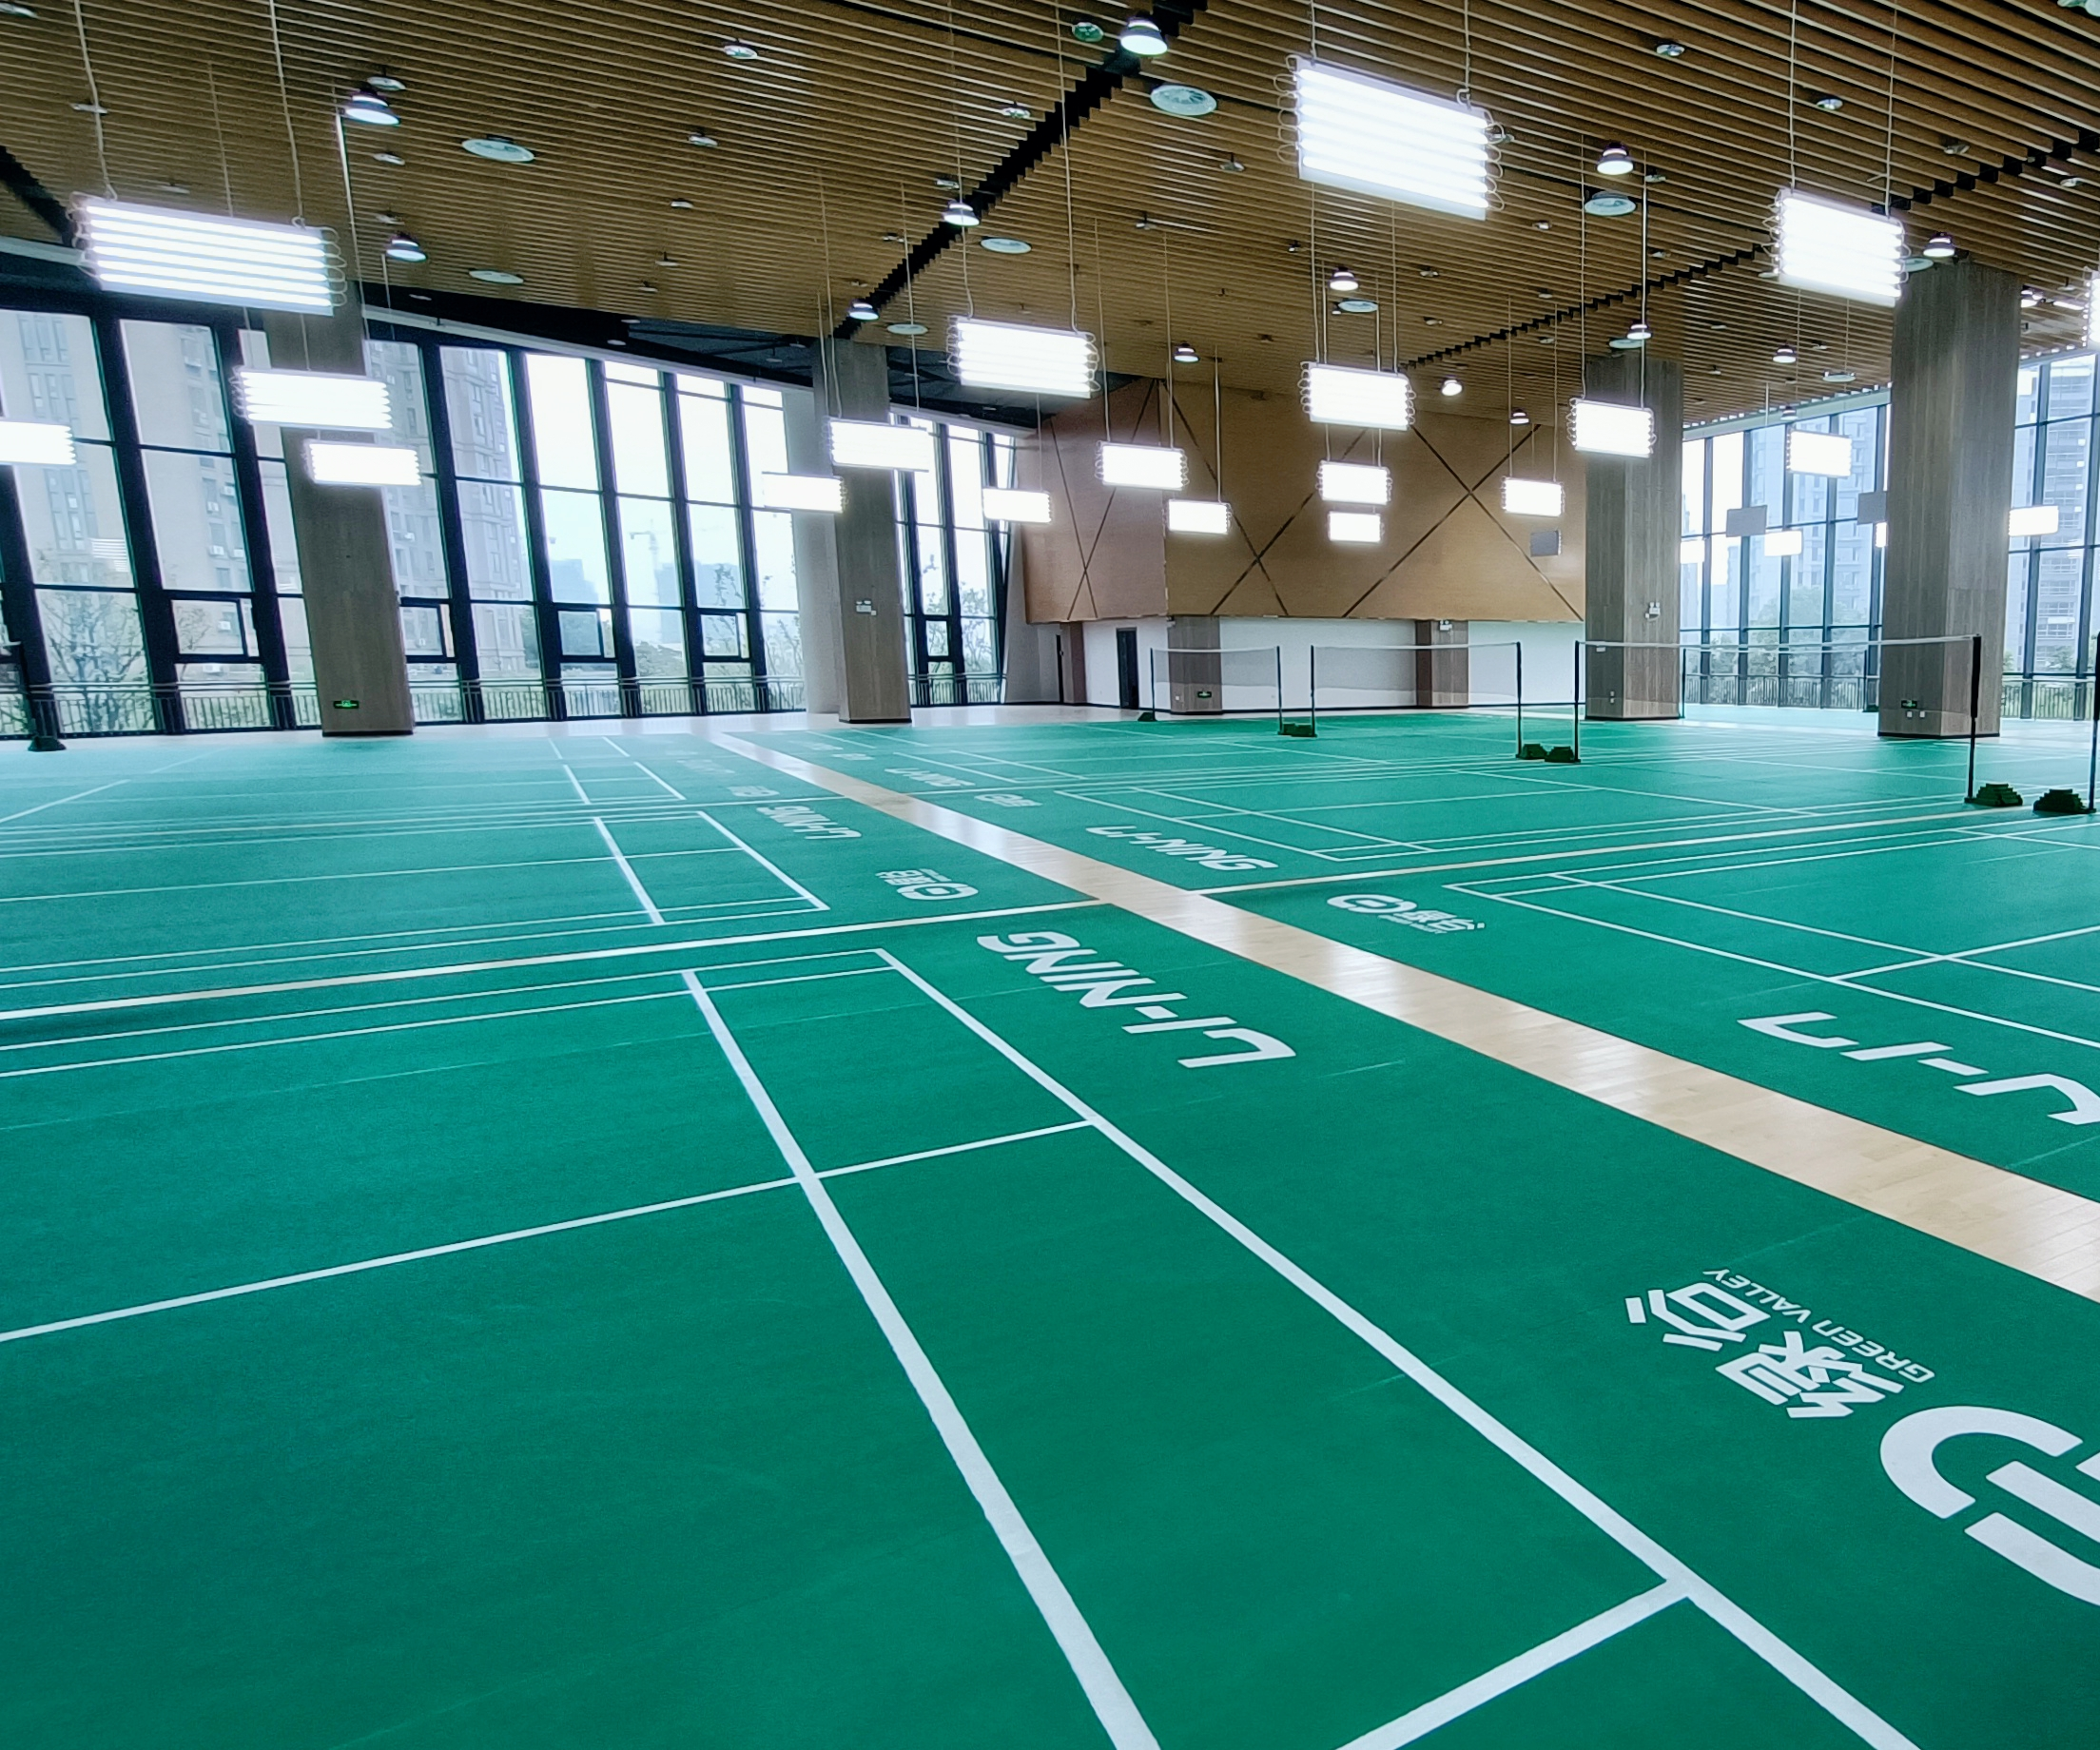 What are the characteristics of commercial flooring？